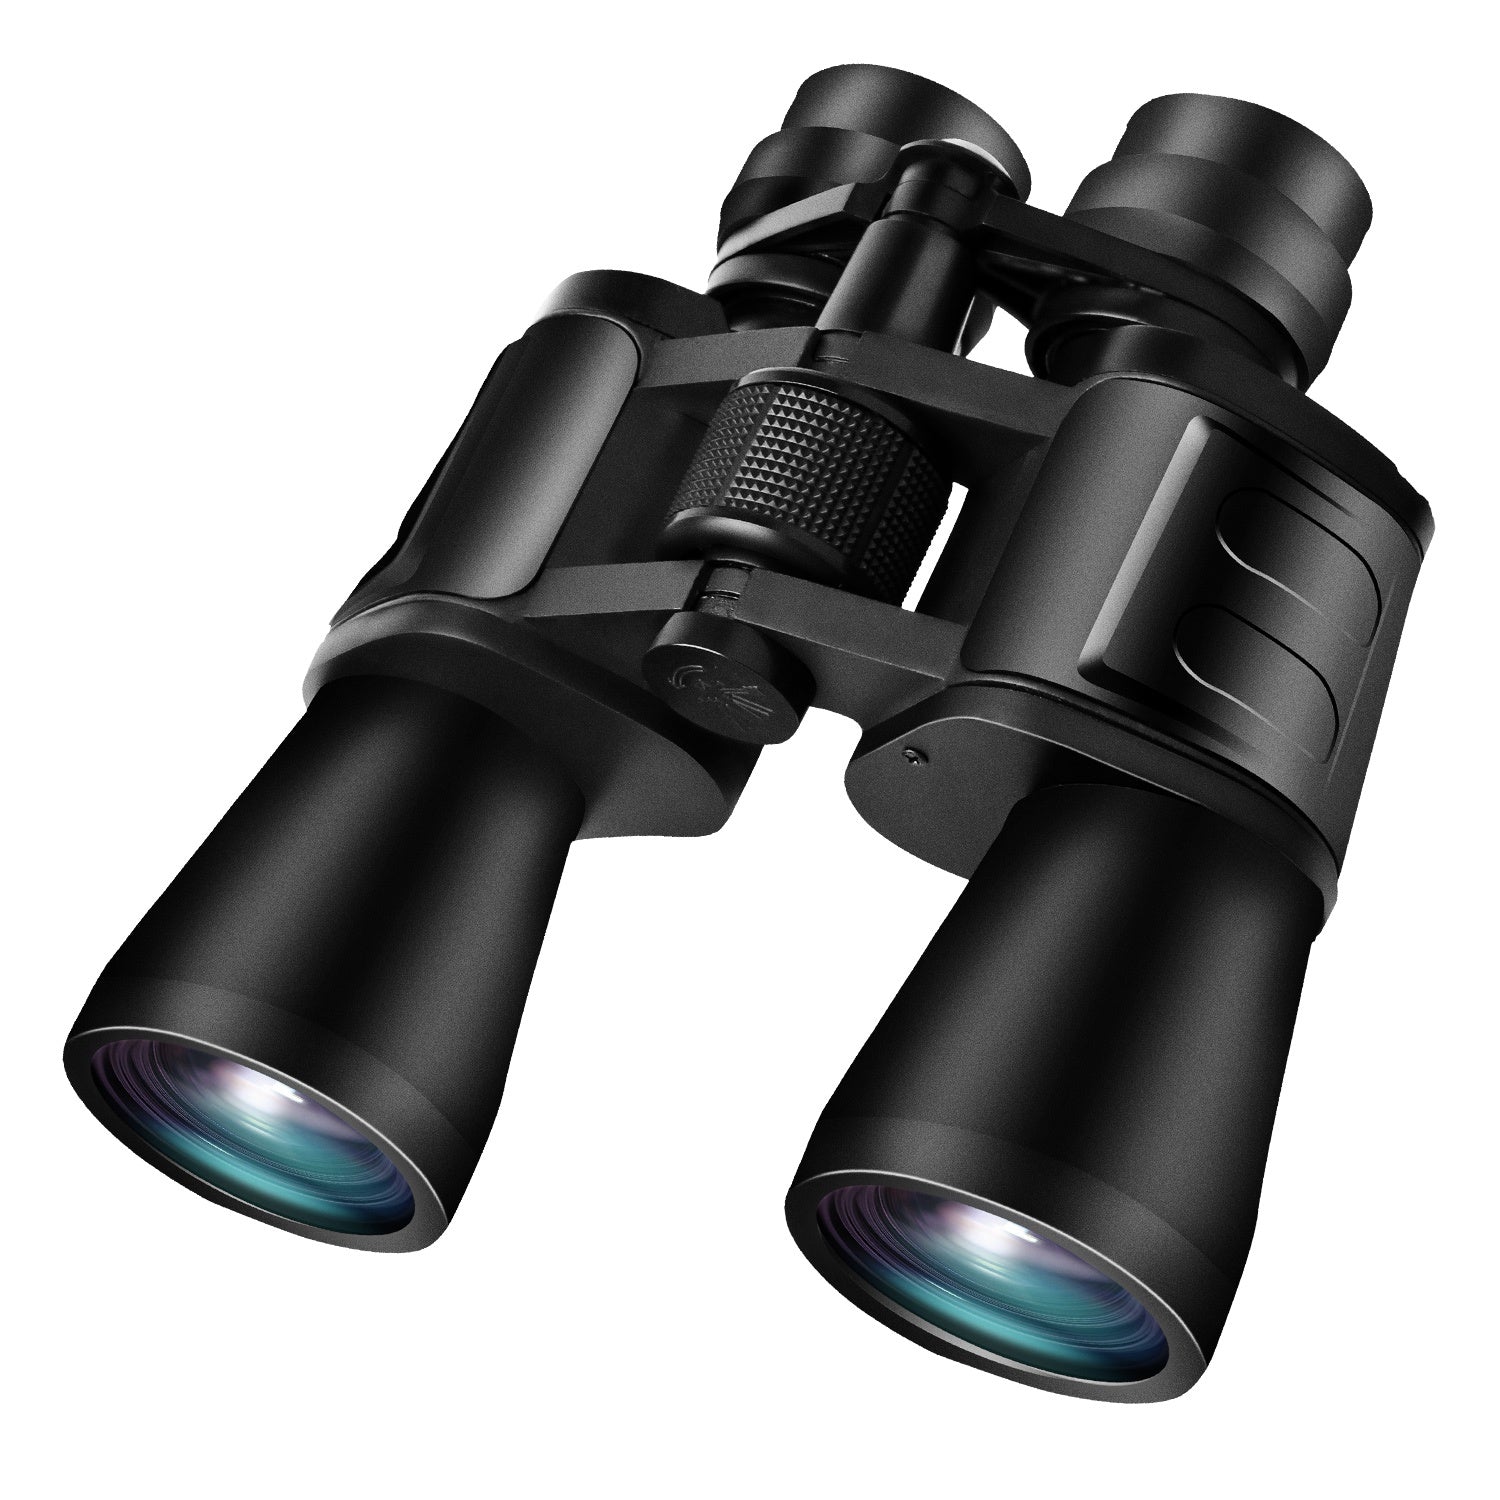 title:Portable Zoom Binoculars with FMC Lens Low Light Night Vision for Bird Watching Hunting Sports Events Concerts Adults Kids;color:Black